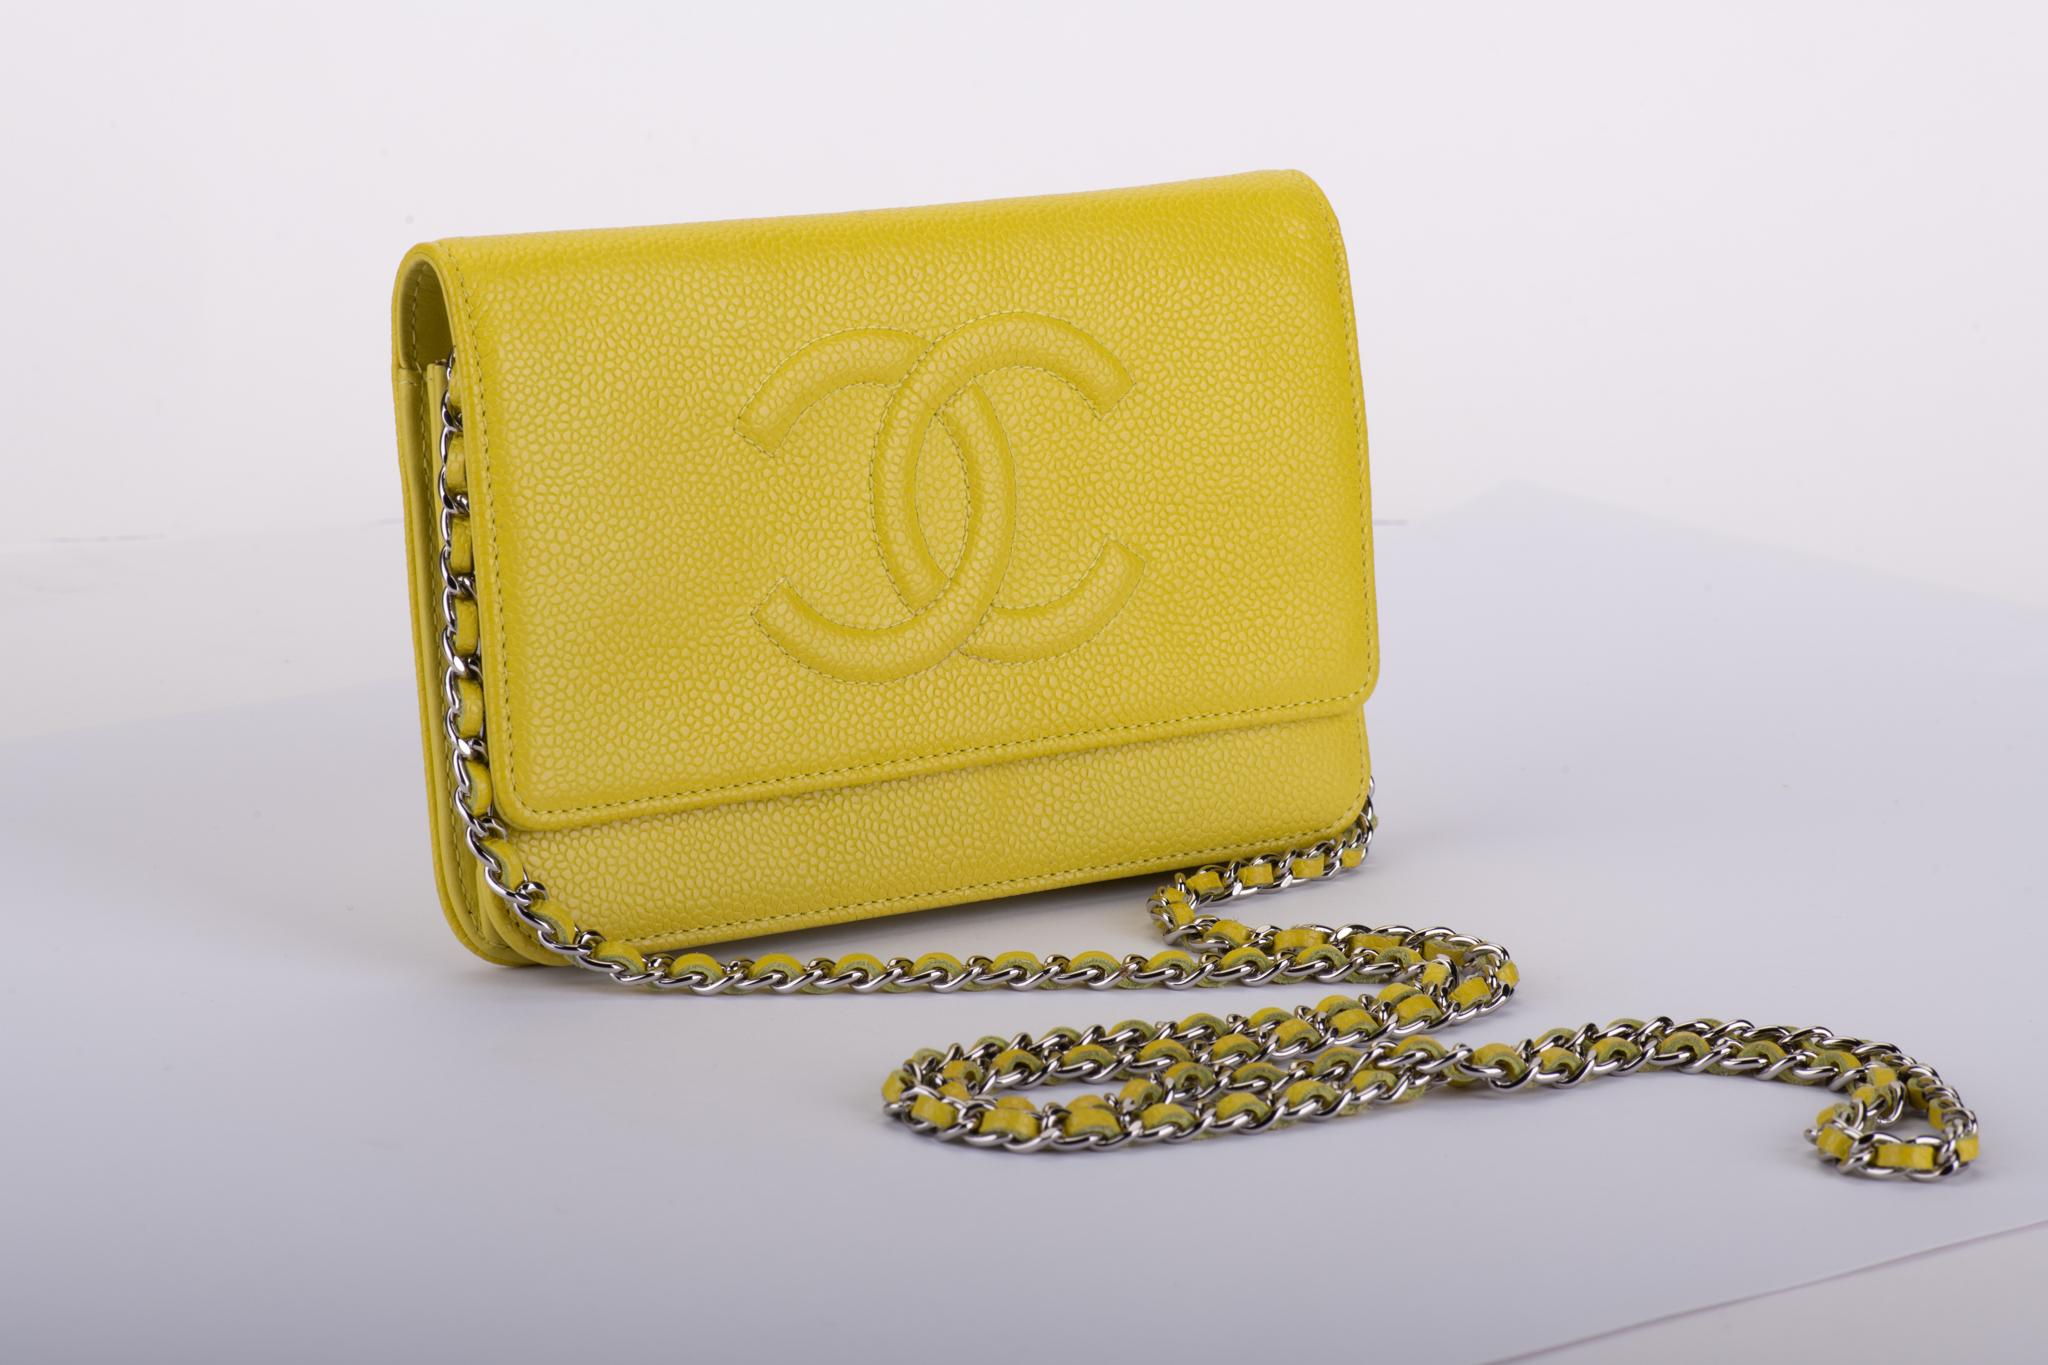 Chanel lemon yellow caviar  wallet on a chain cross body. Excellent condition. Comes with hologram, dust cover and box.